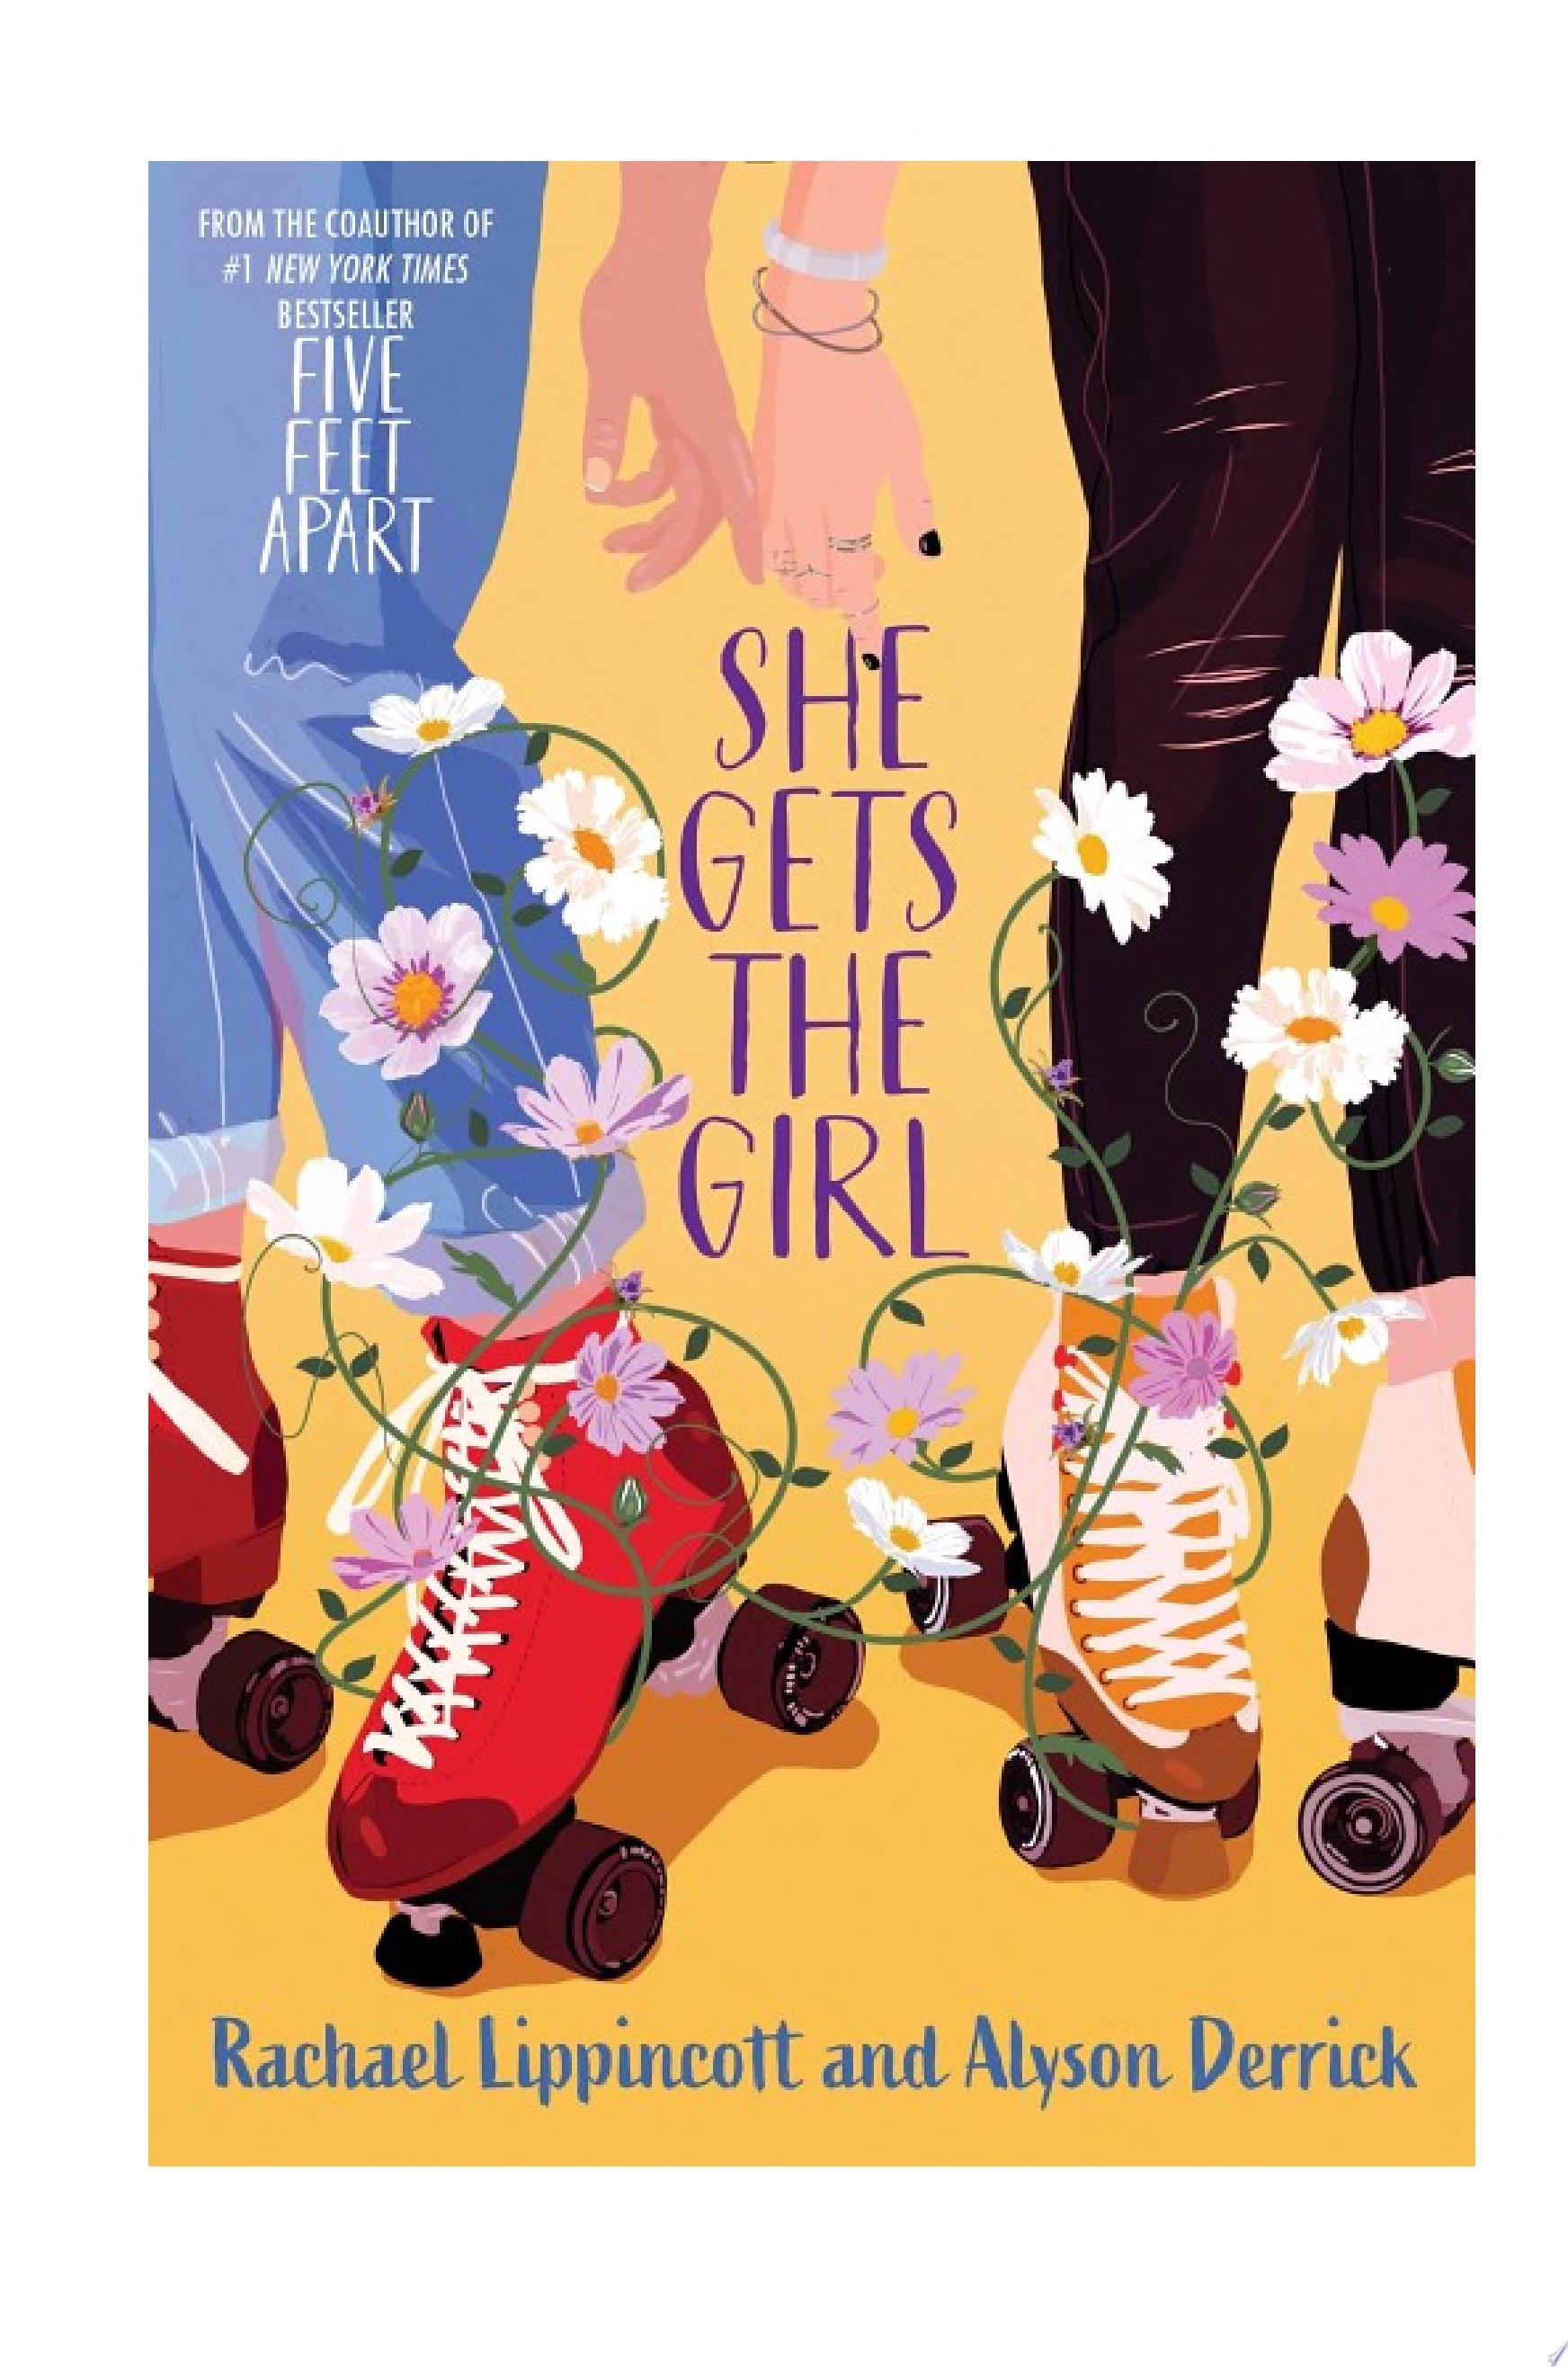 Image for "She Gets the Girl"